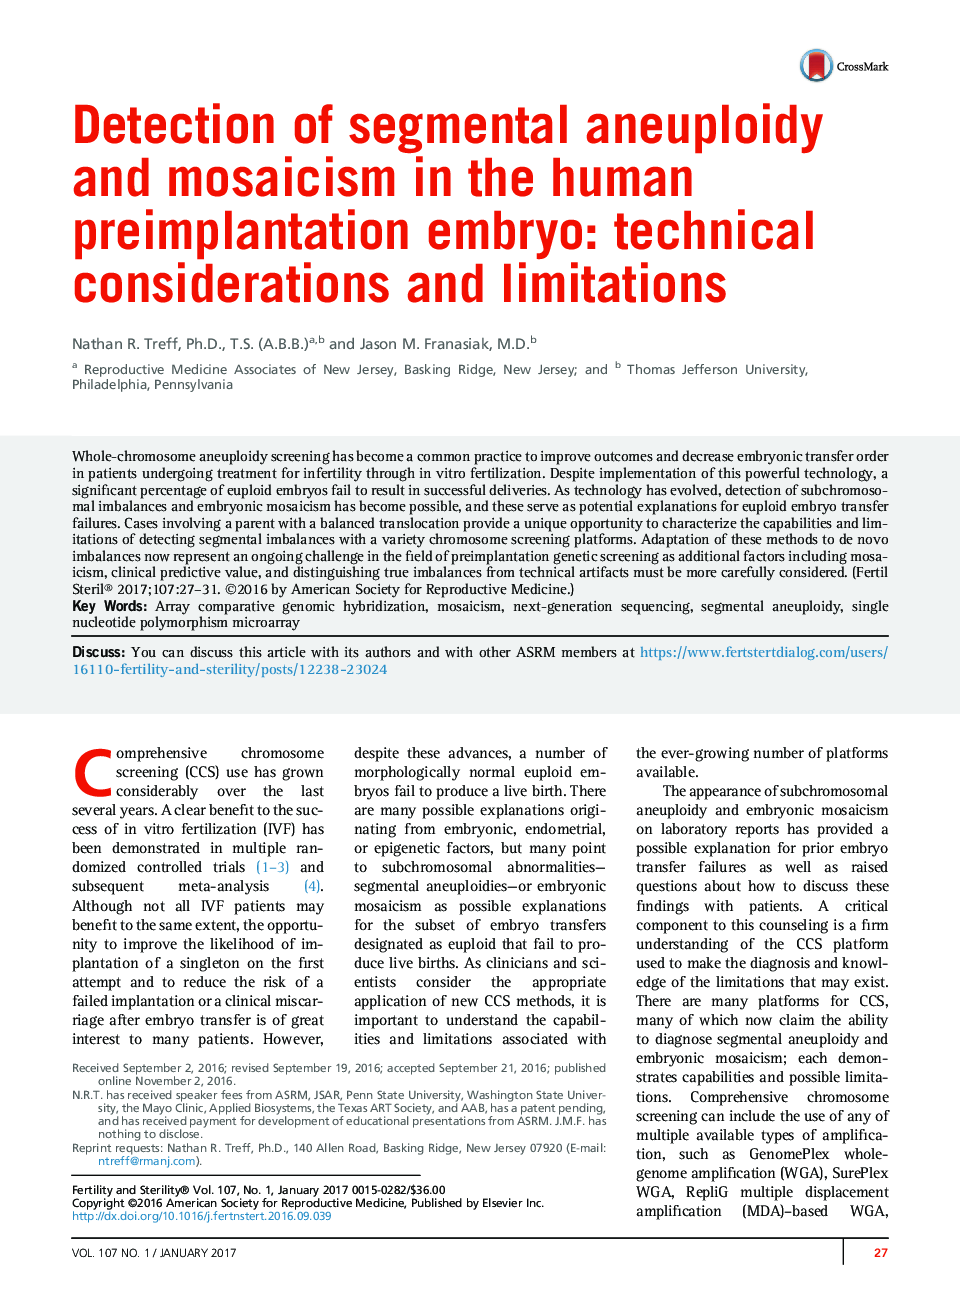 Detection of segmental aneuploidy and mosaicism in the human preimplantation embryo: technical considerations and limitations